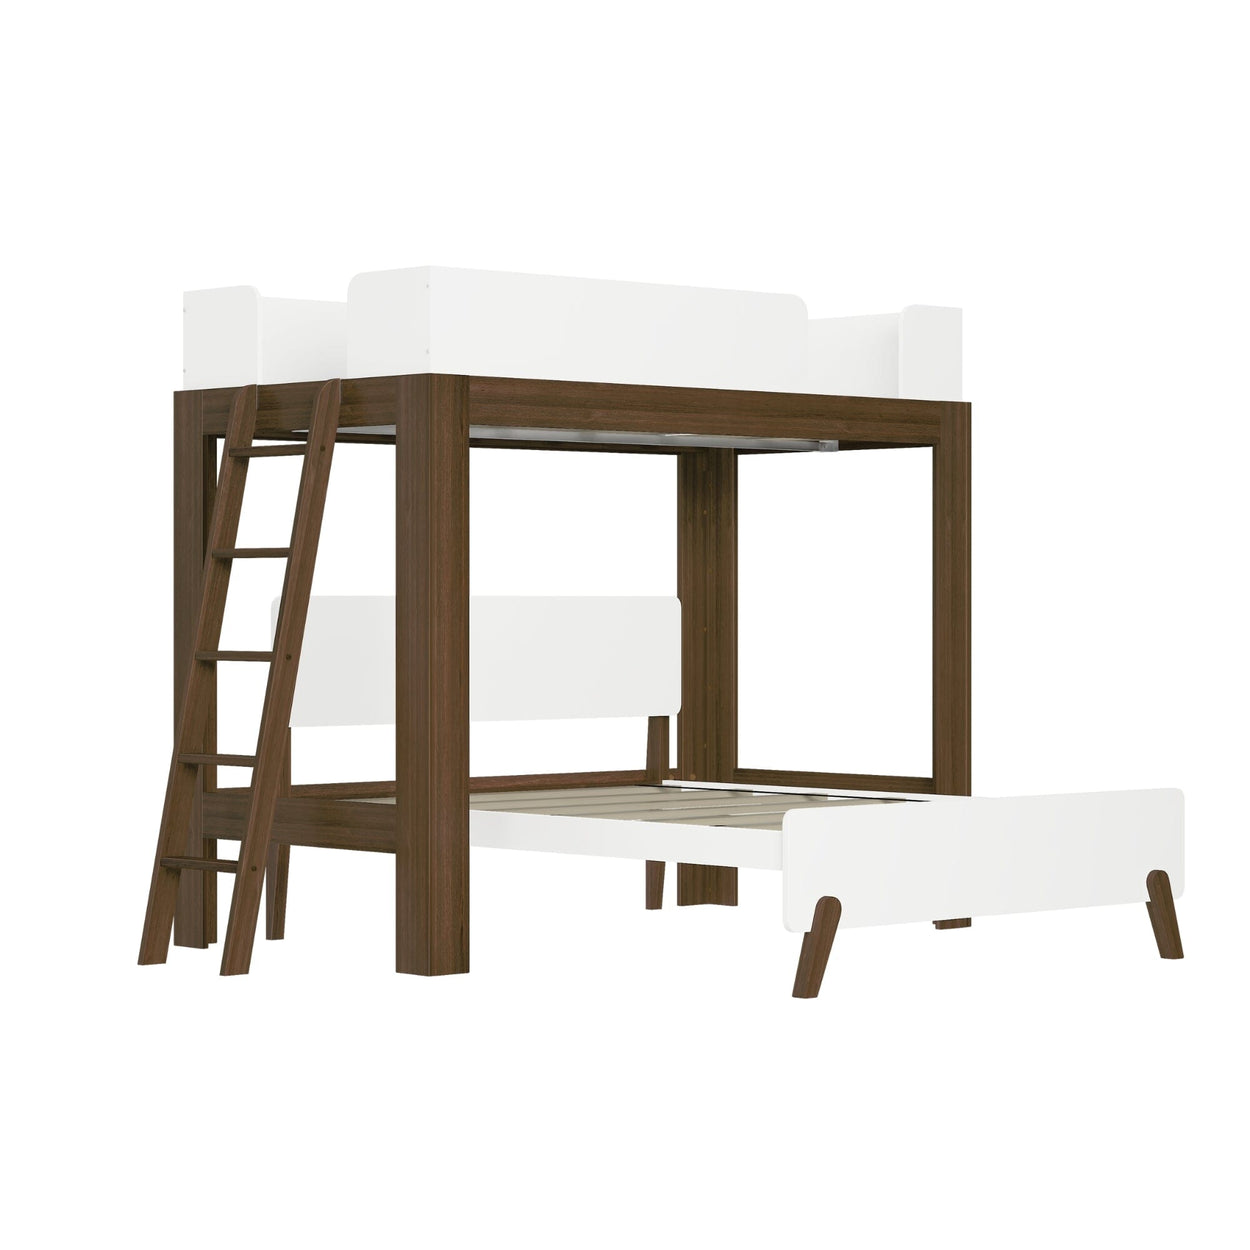 20-812-528 : Bunk Beds Mid-Century Modern L-Shaped Twin over Full Bunk Bed with Ladder on End, Walnut and White